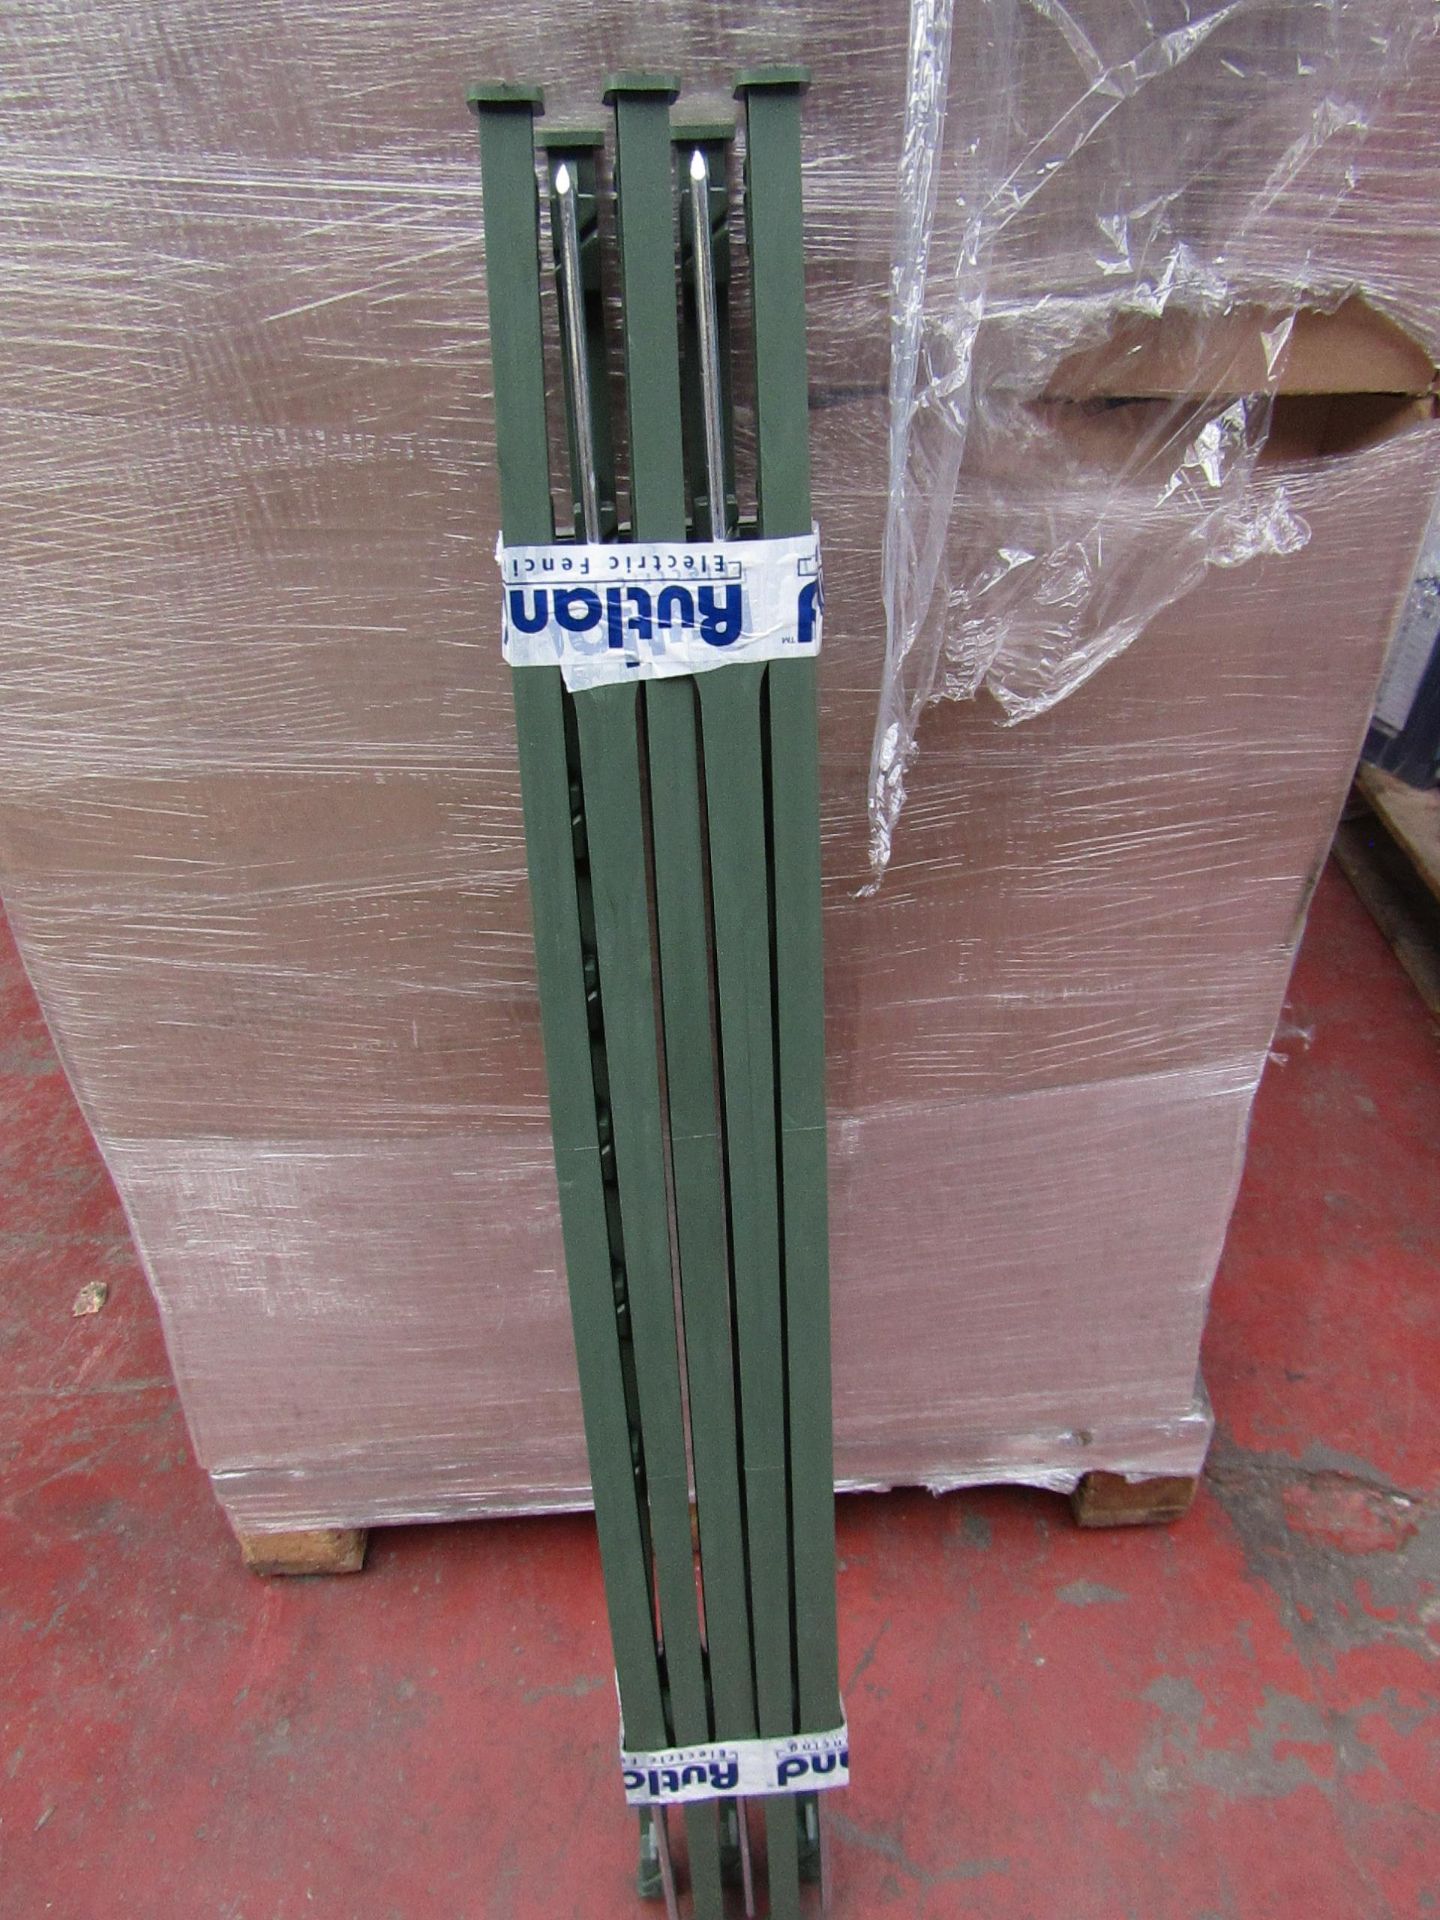 10 Pack of Rutland Green Economy Electric Fencing Poly Posts - New & Good Condition. RRP £25 @